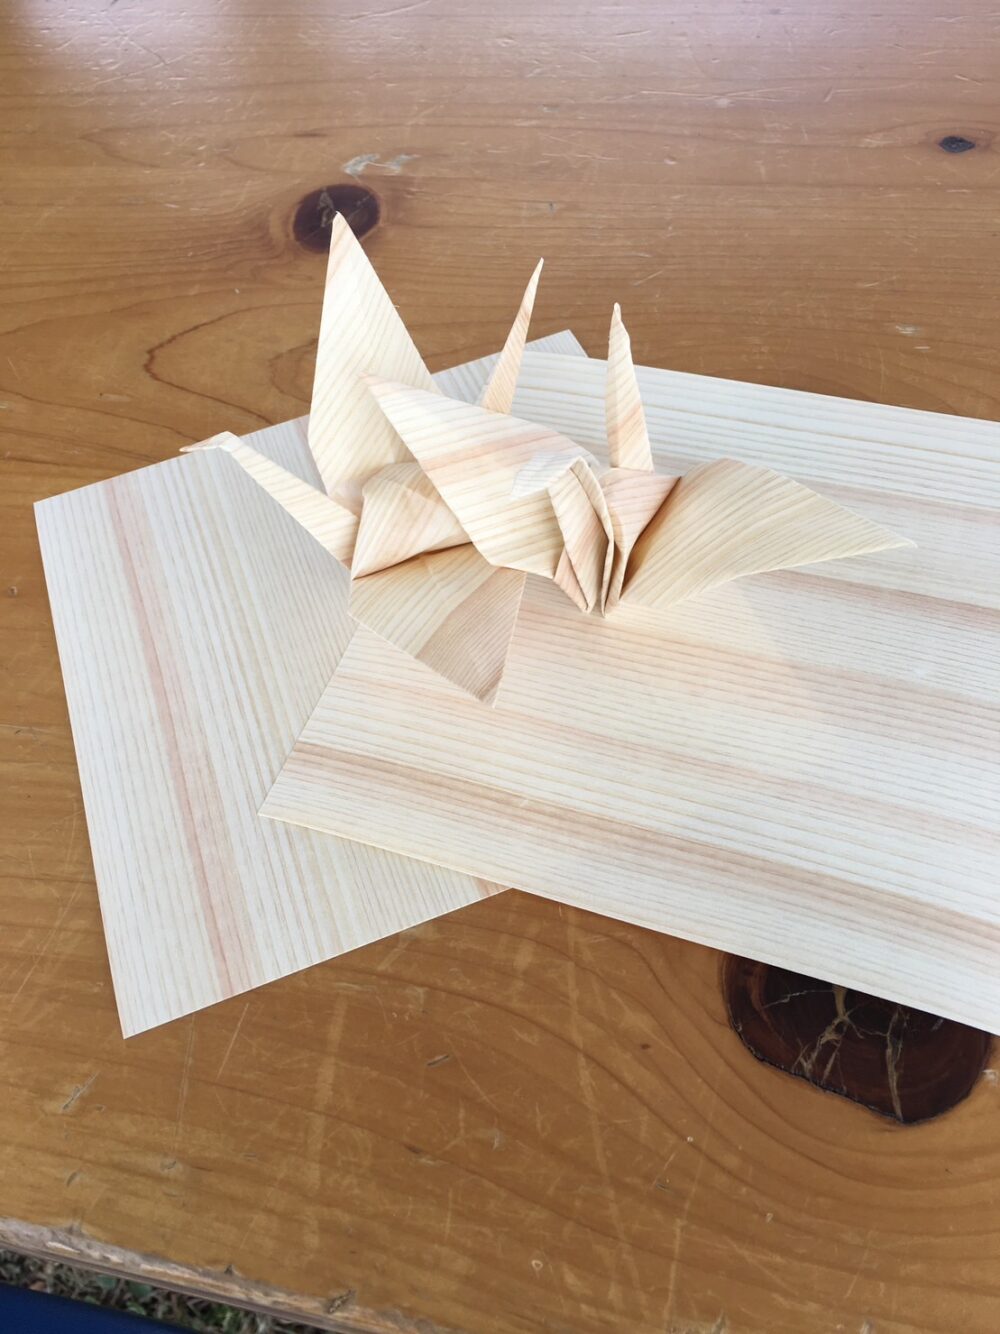 Thousand paper cranes project with wooden origami